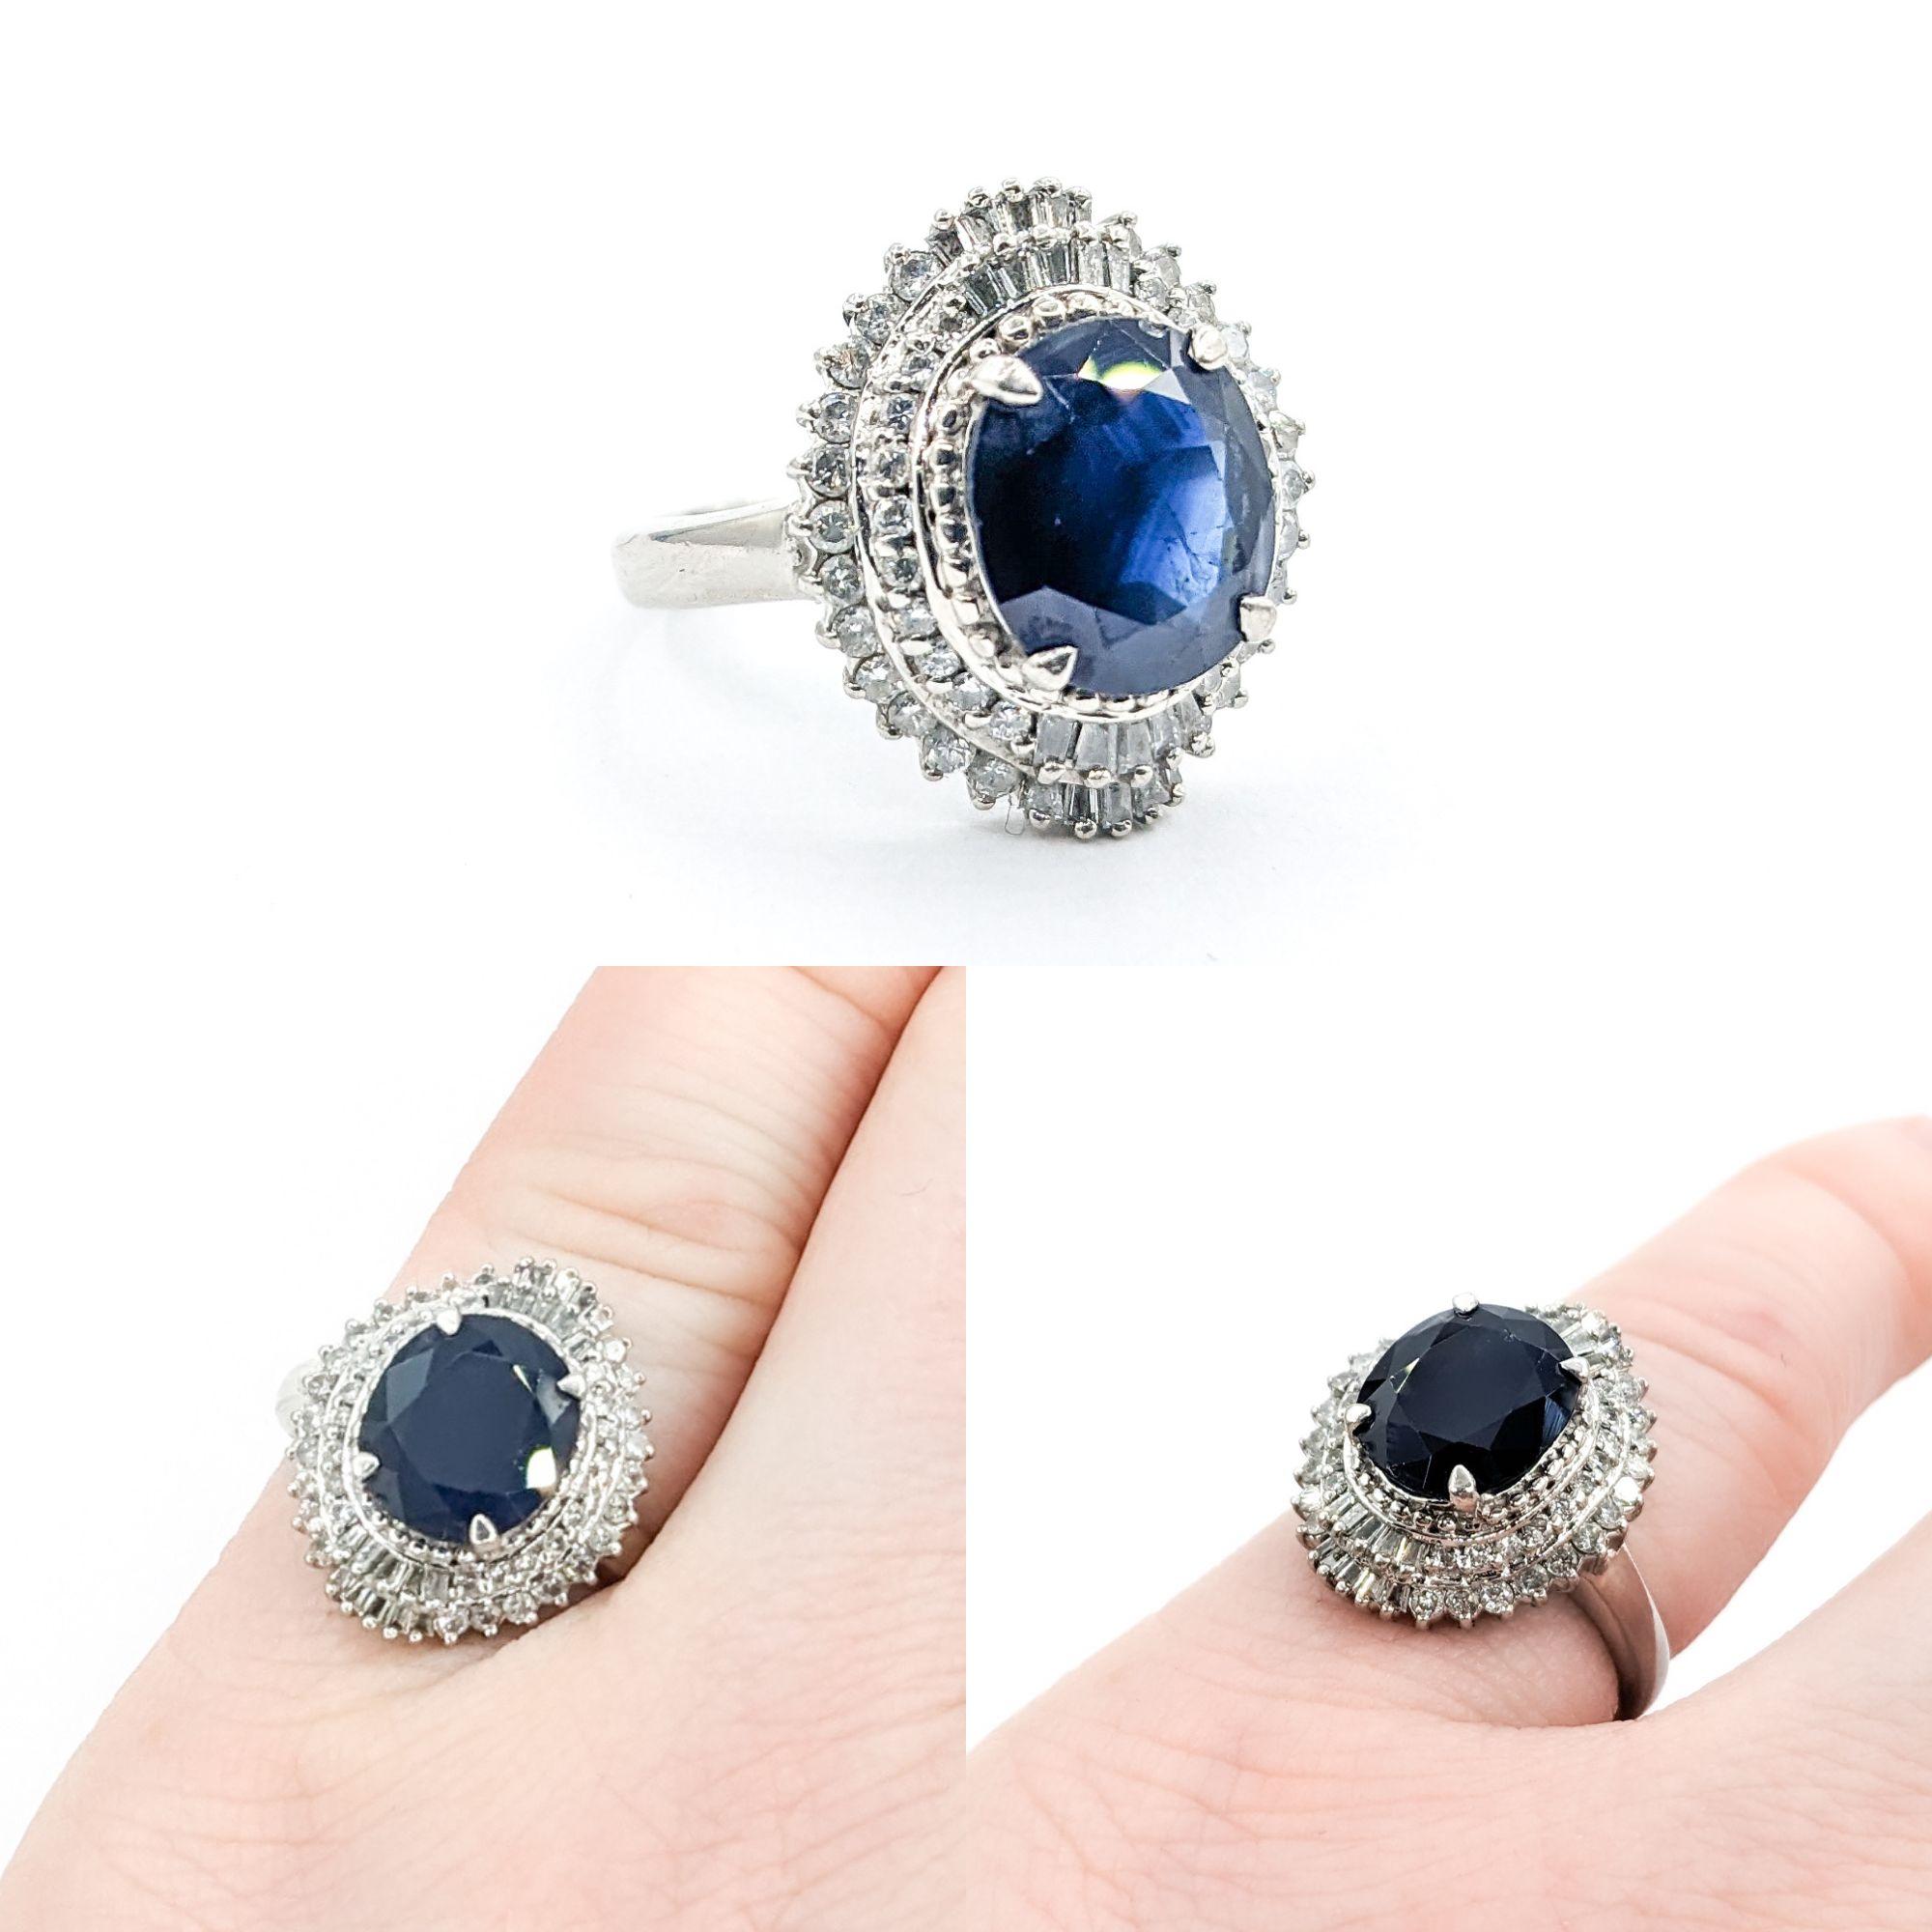 3.4ct Blue Sapphire & Diamond Ring In Platinum

Introducing an exquisite Gemstone Fashion Ring, masterfully crafted in 900pt Platinum. This captivating piece showcases a stunning 3.4ct Sapphire centerpiece, complemented by .60ctw of Round & Baguette